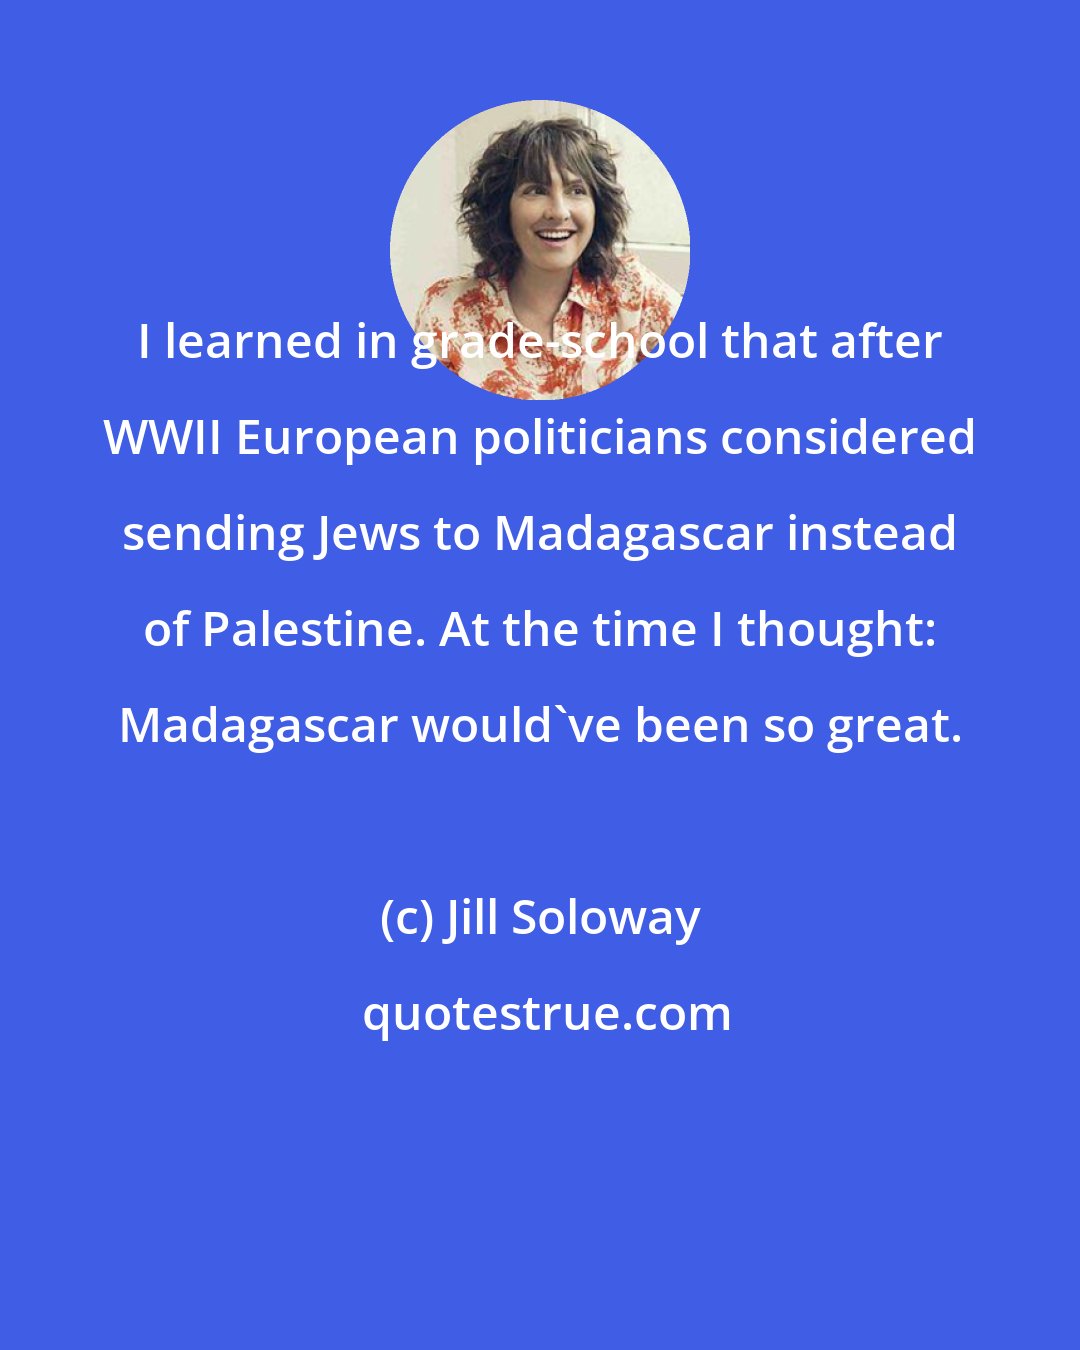 Jill Soloway: I learned in grade-school that after WWII European politicians considered sending Jews to Madagascar instead of Palestine. At the time I thought: Madagascar would've been so great.